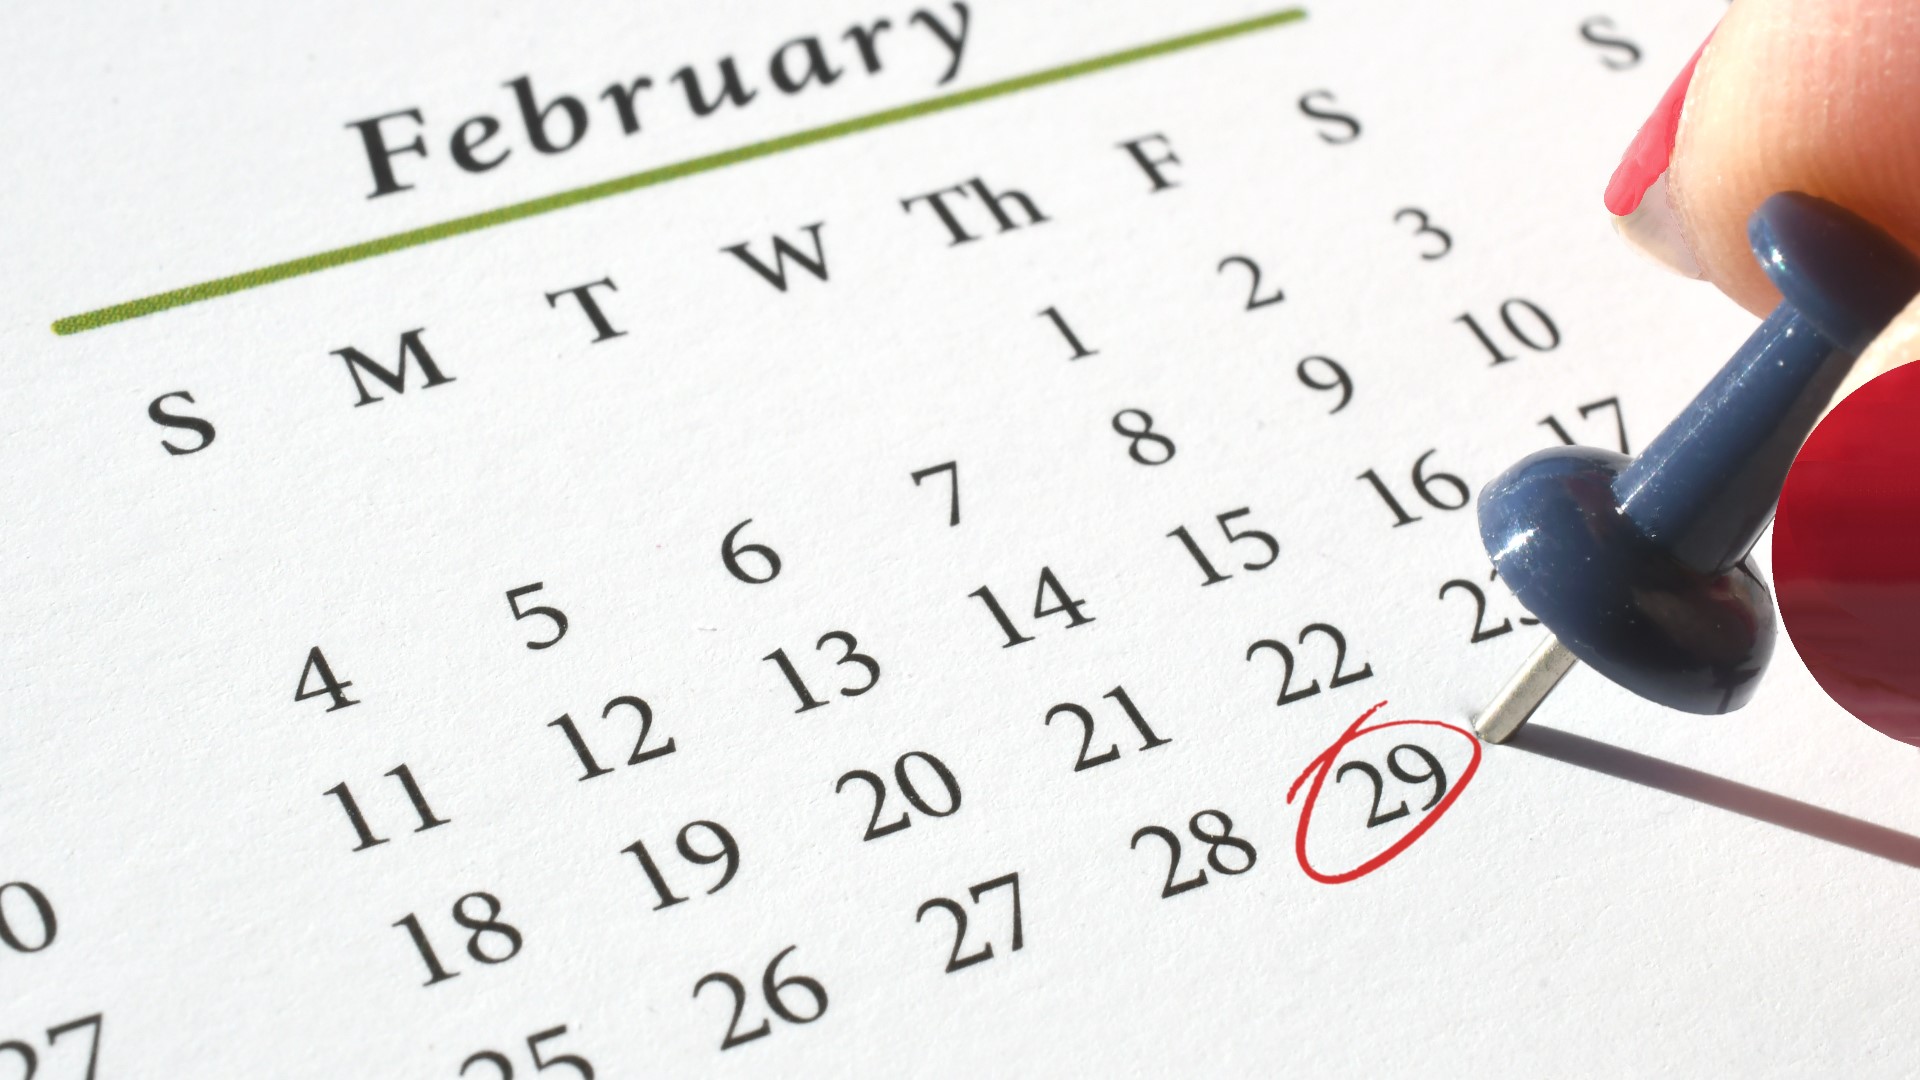 3 fun facts about leap day February 29